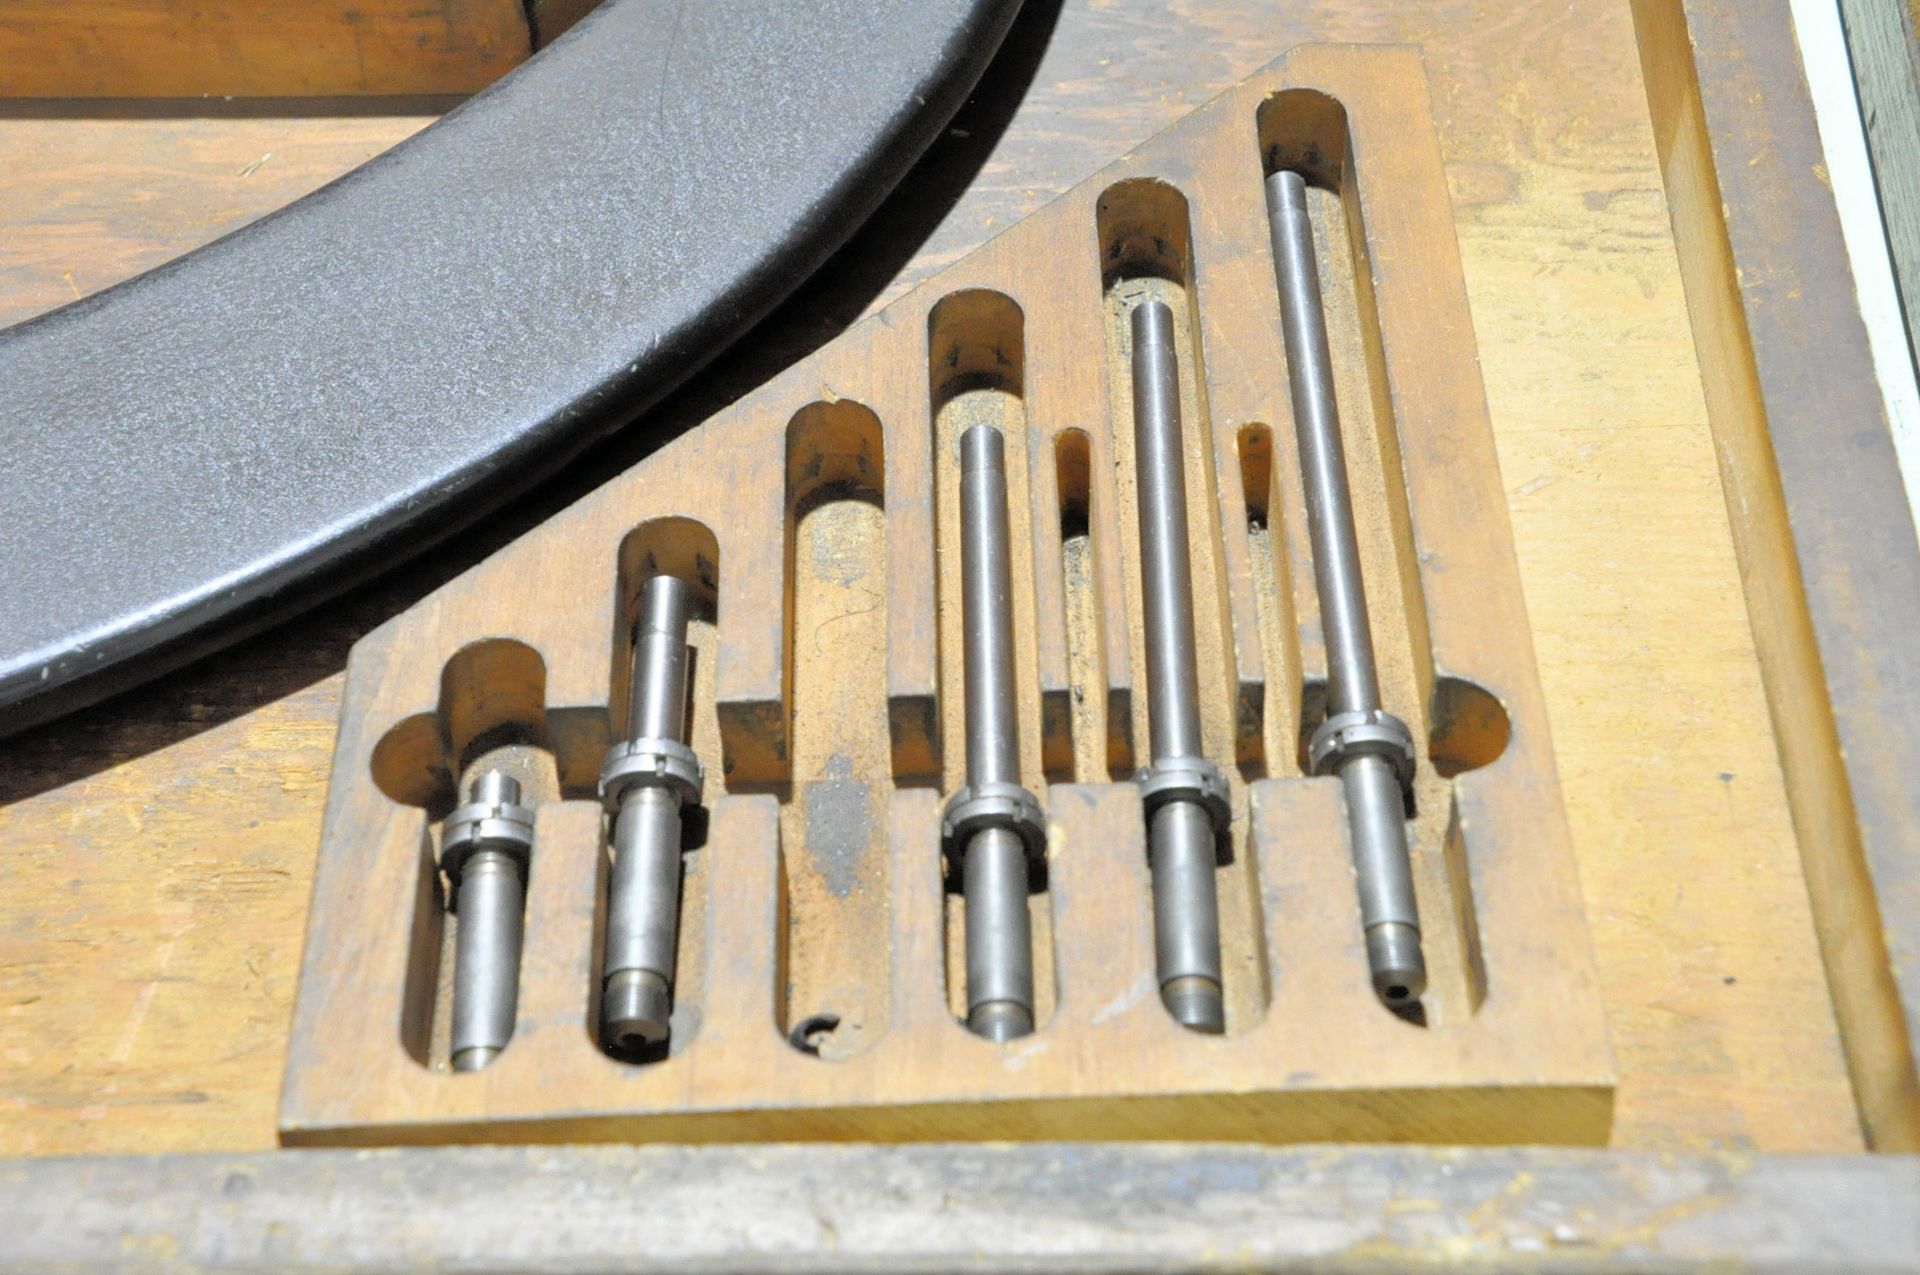 Starrett No. 724, 18 - 24" Outside Micrometer Set with Case - Image 3 of 3